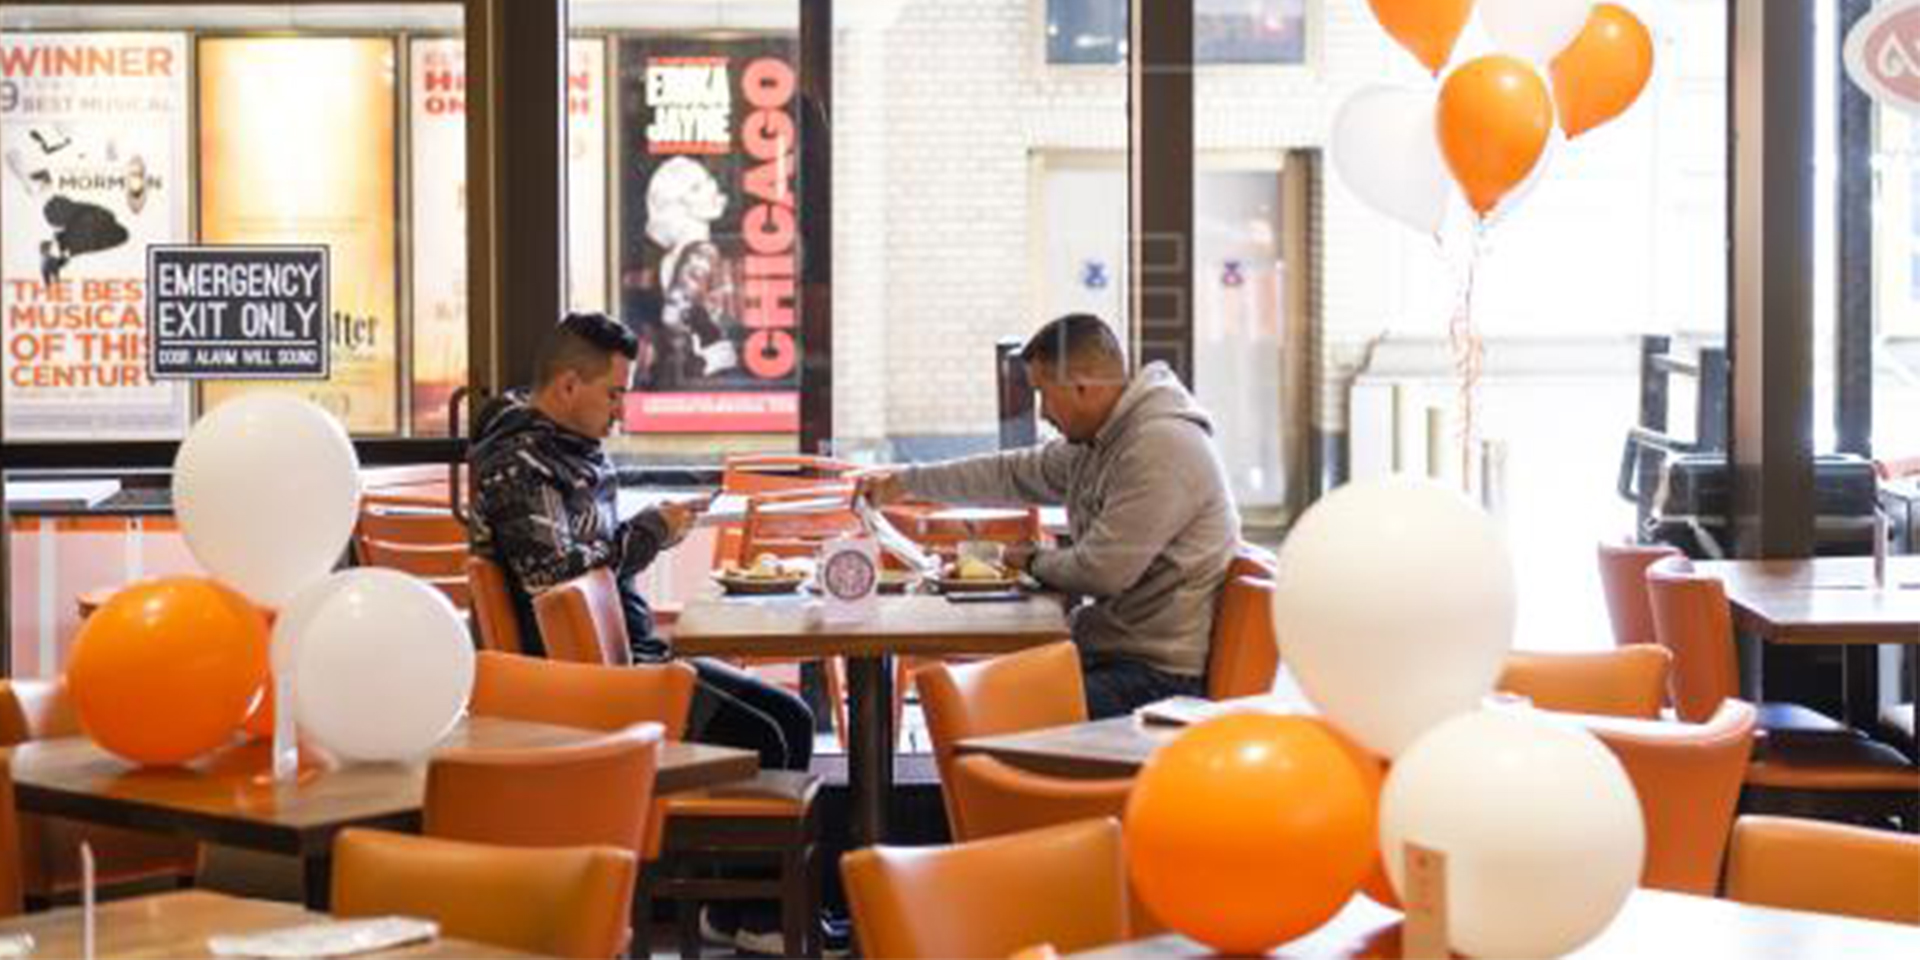 Men sitting in an empty restaurant with white and orange balloons.